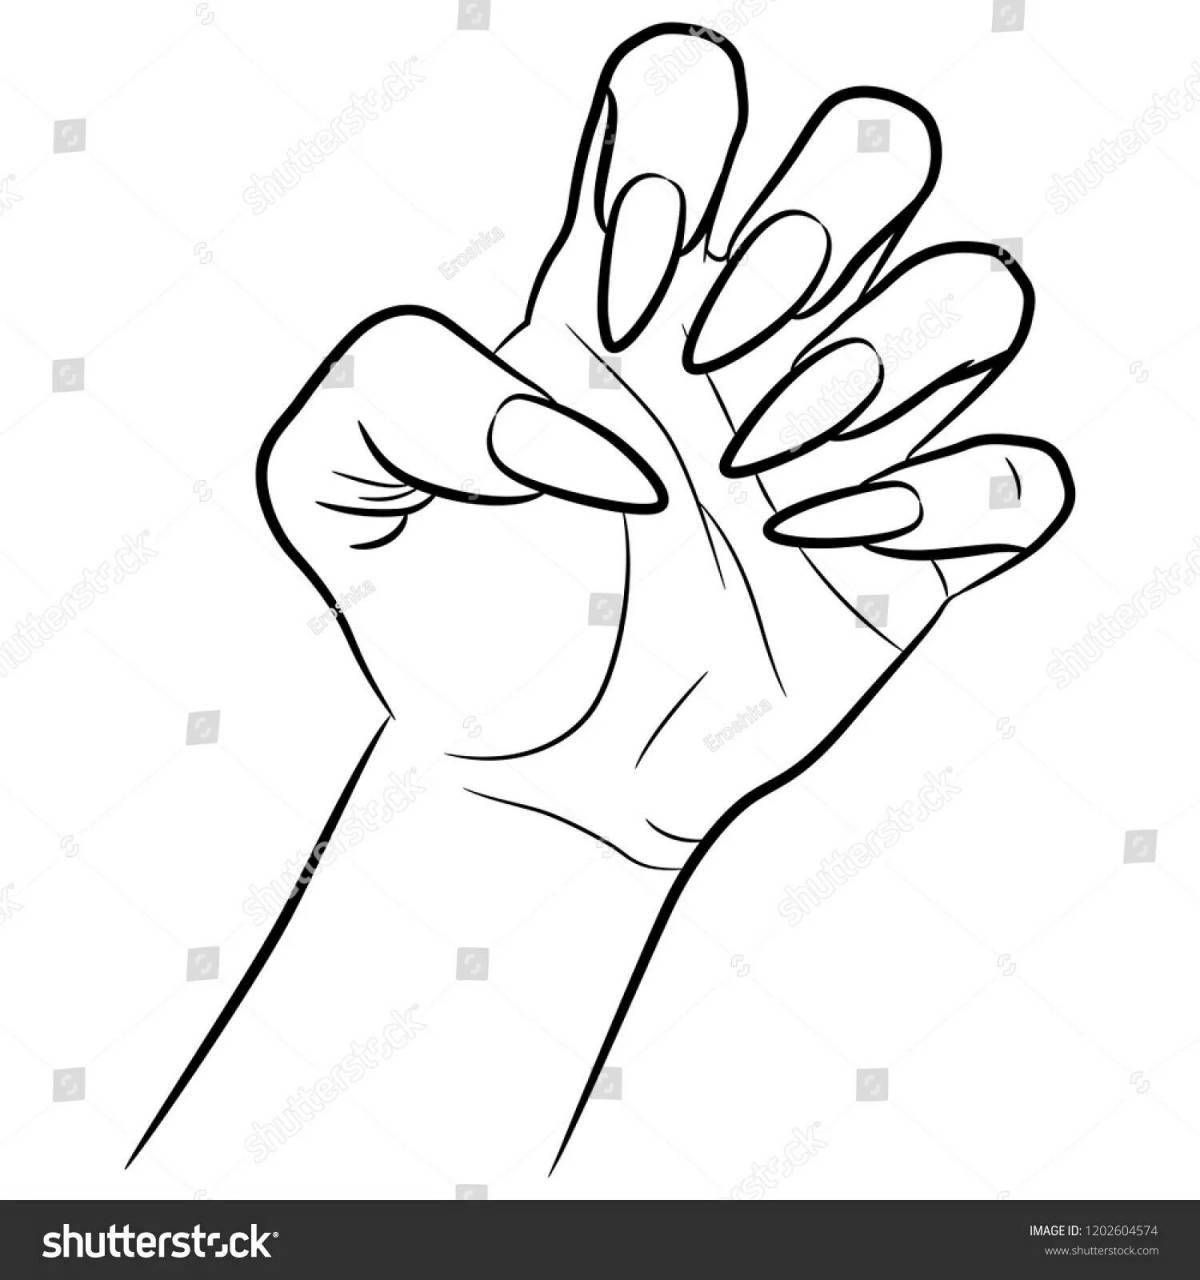 Coloring page graceful manicure